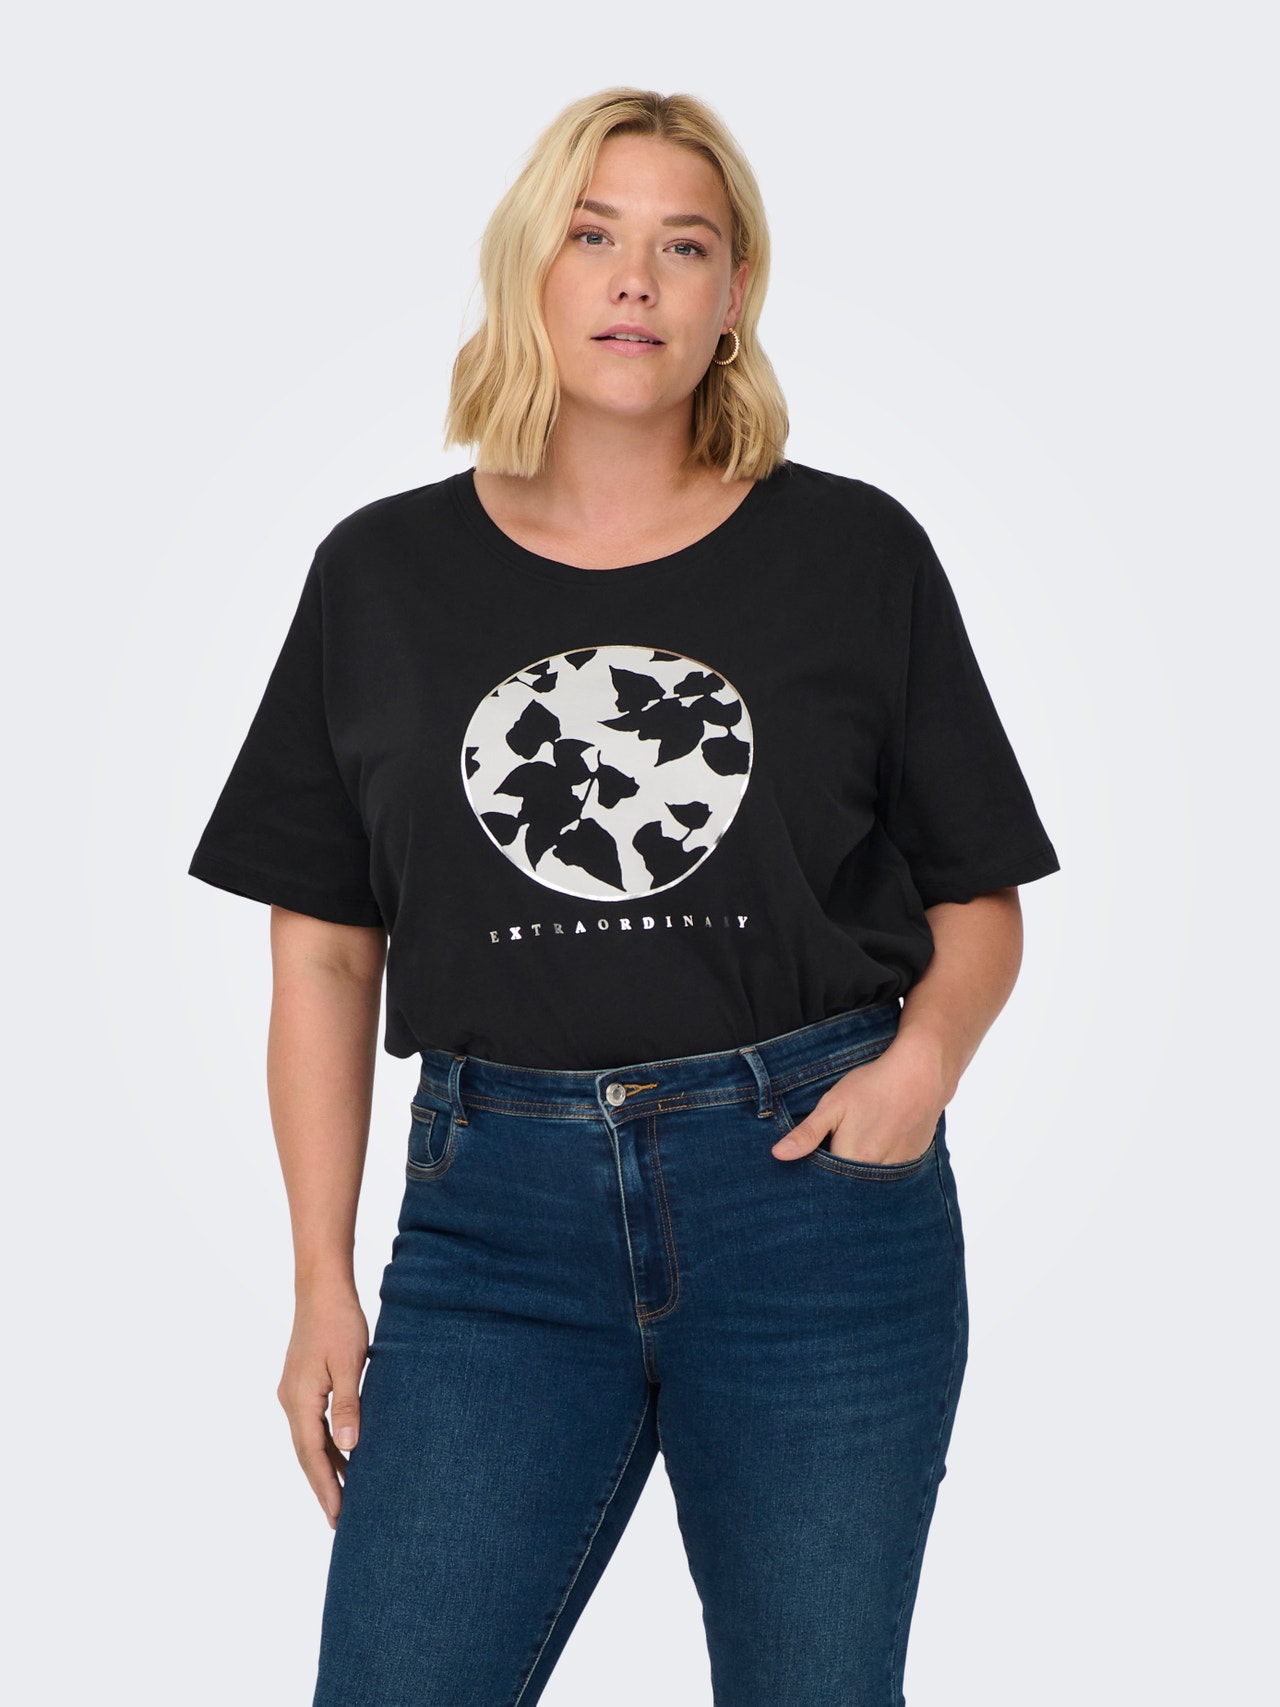 ONLY Curvy t-shirt with print -Black - 15303980